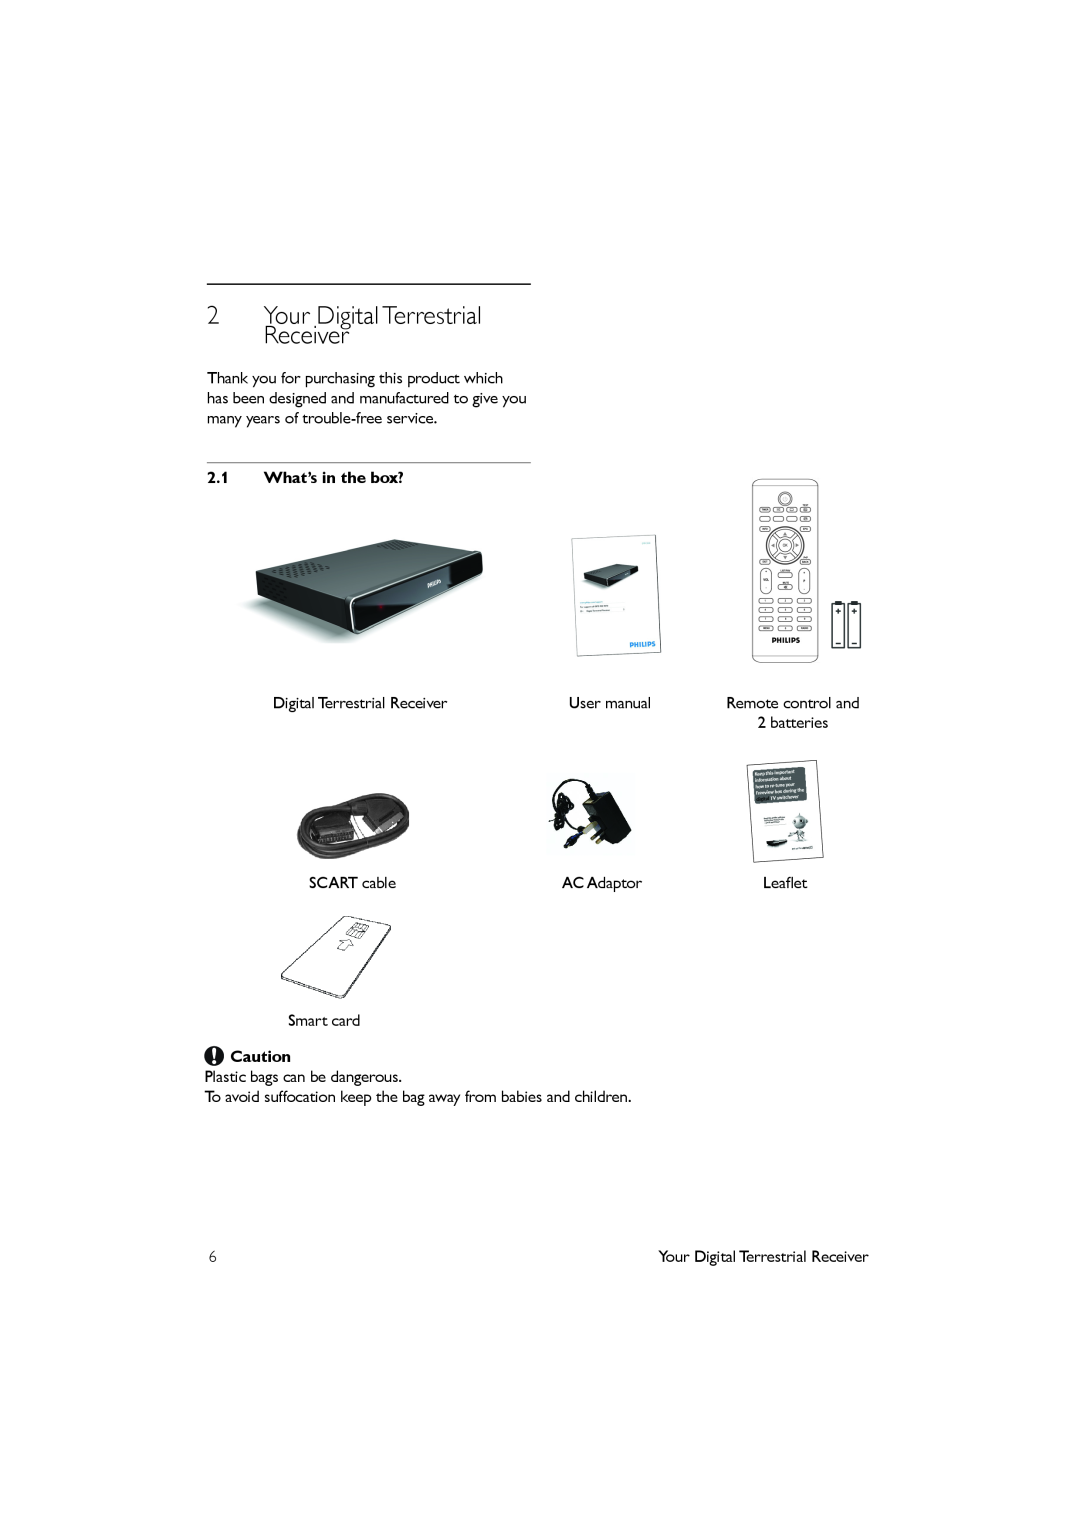 Philips DTR 2530/05 manual Your Digital Terrestrial Receiver, What’s in the box? 